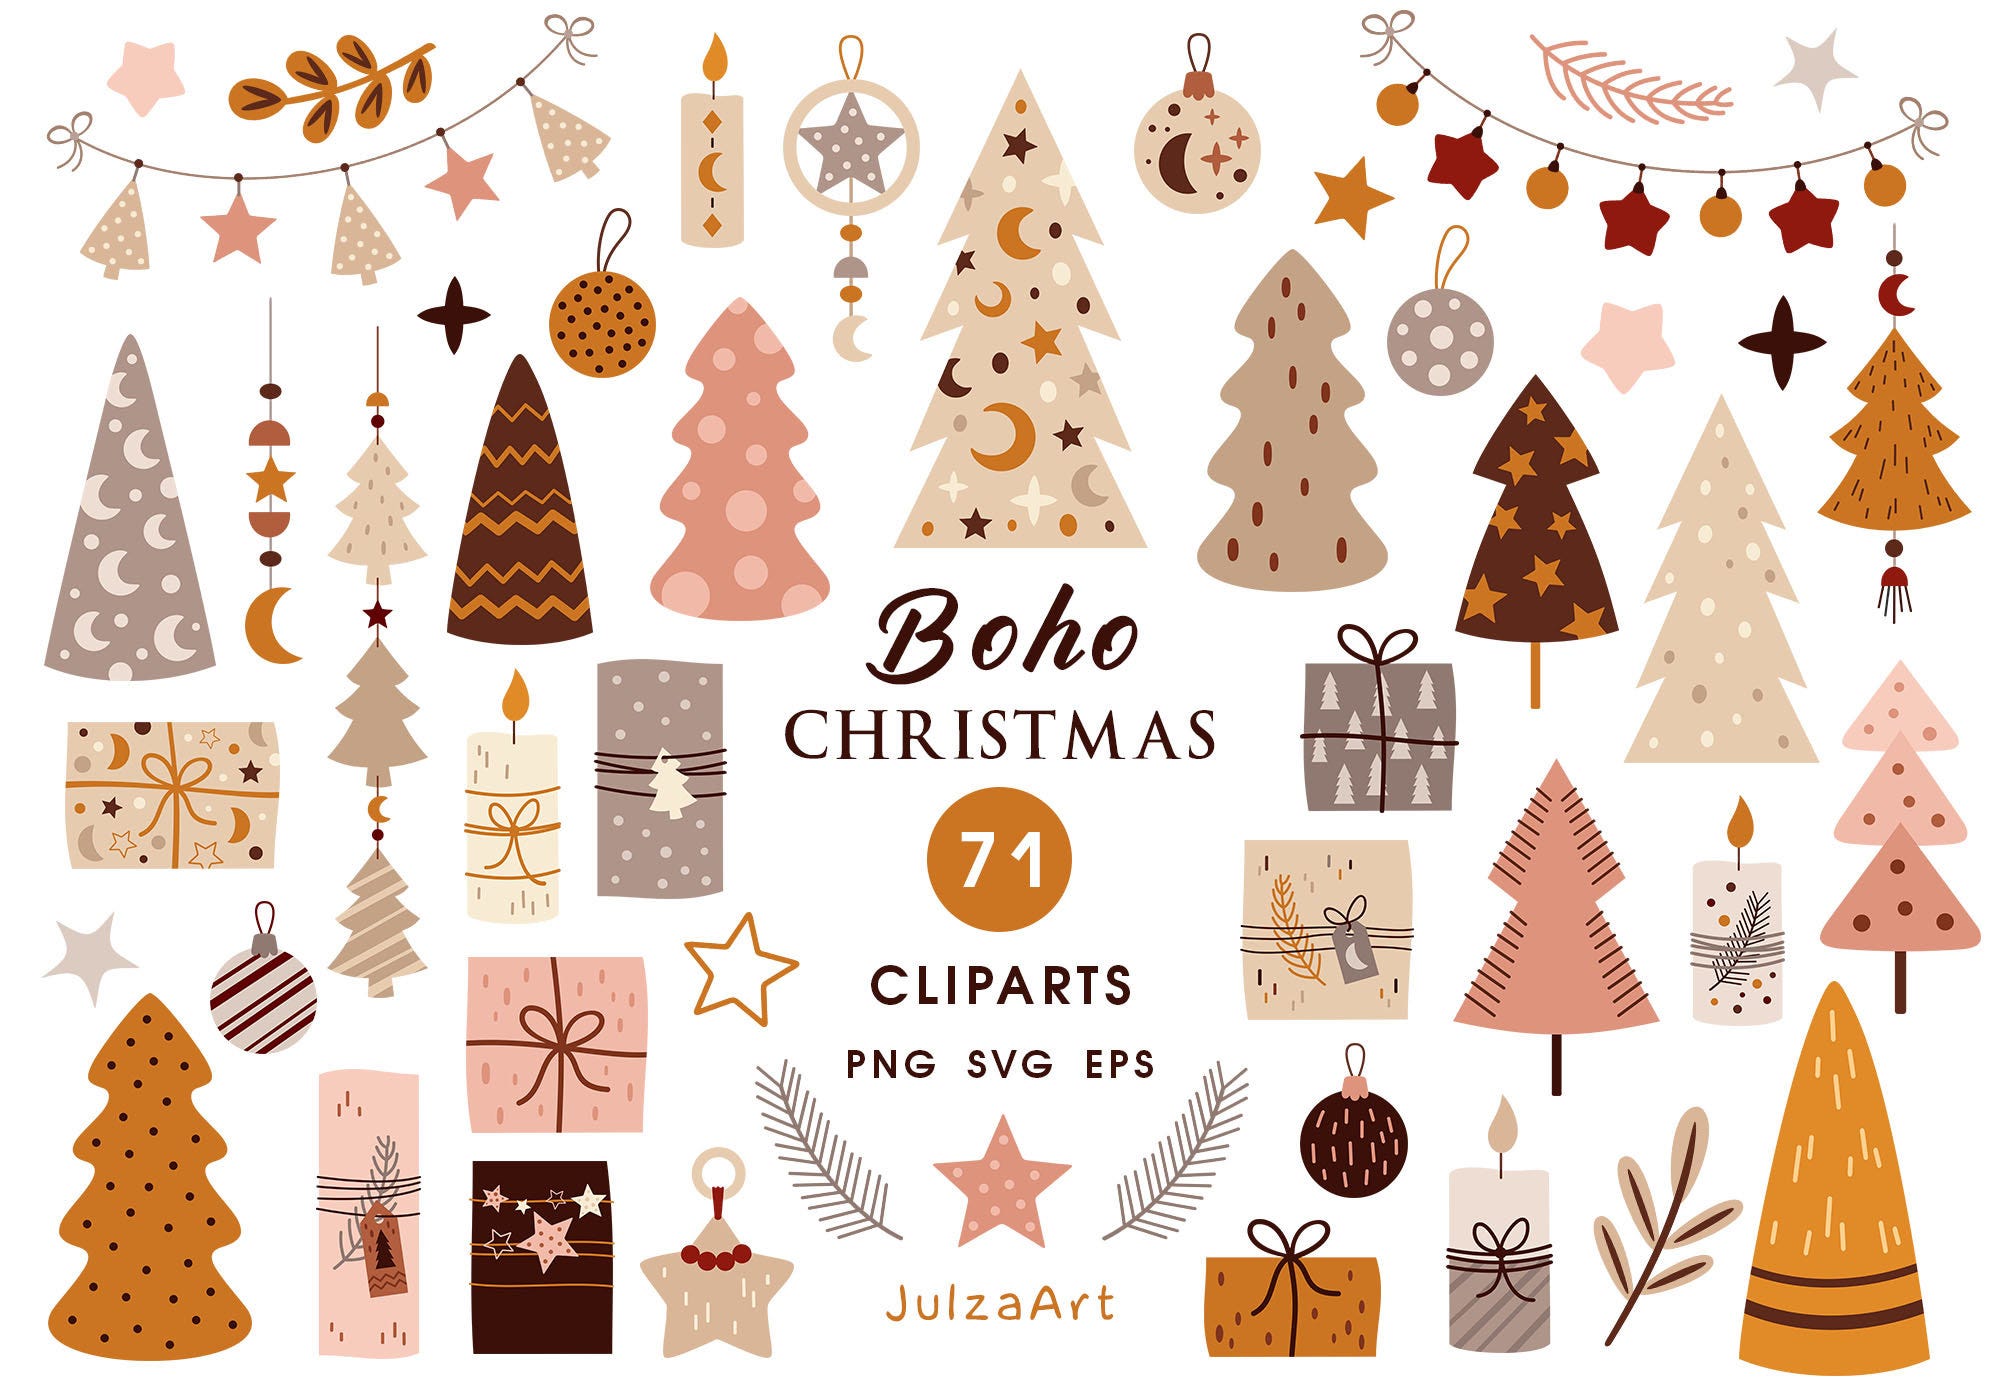 Boho Christmas clipart, Christmas tree svg, Cozy Christmas decor, Gender neutral New year clip art, Digital download, Commercial use